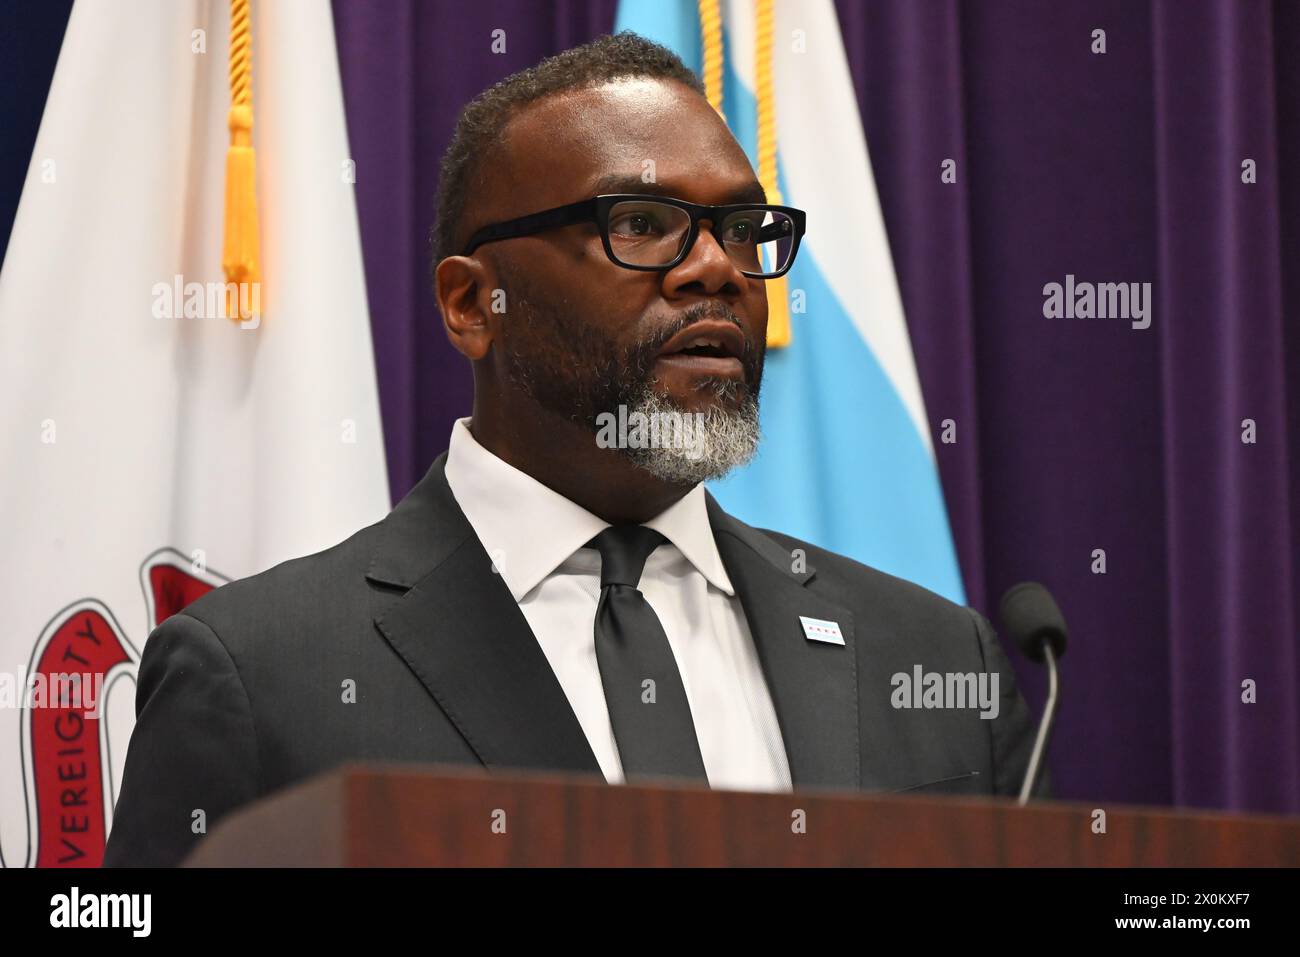 Mayor of Chicago Brandon Johnson attends the news conference and delivers remarks. Chicago Police Department held a news conference to discuss its strategy to address and prevent robberies throughout the City of Chicago in Chicago, Illinois, United States. Stock Photo